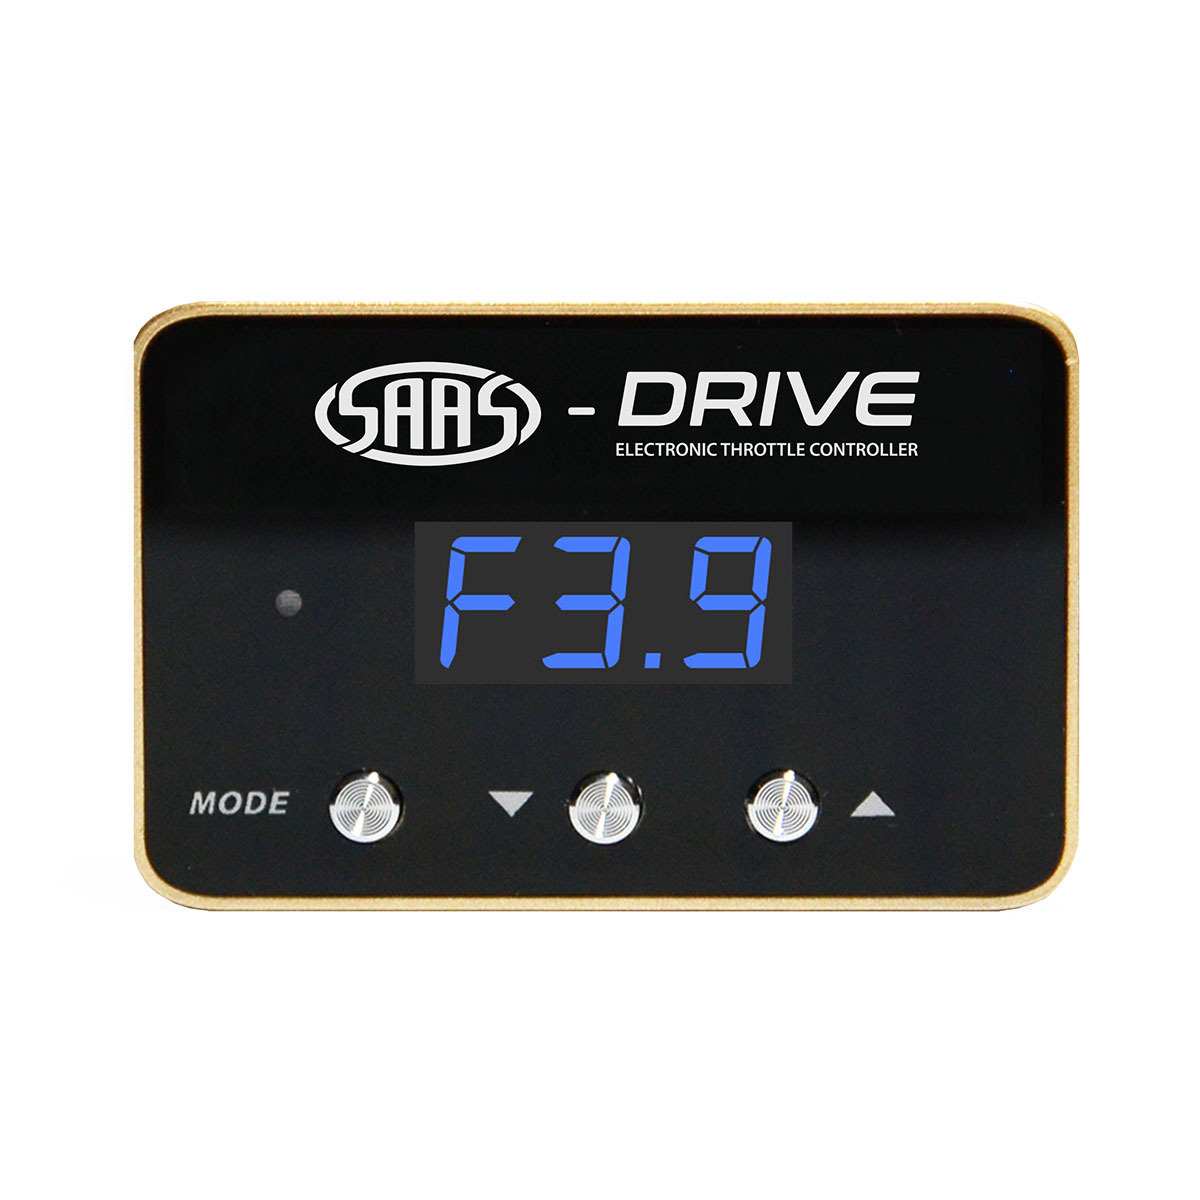 SAAS-Drive Holden Commodore VE 2006 - 2013 Throttle Controller 